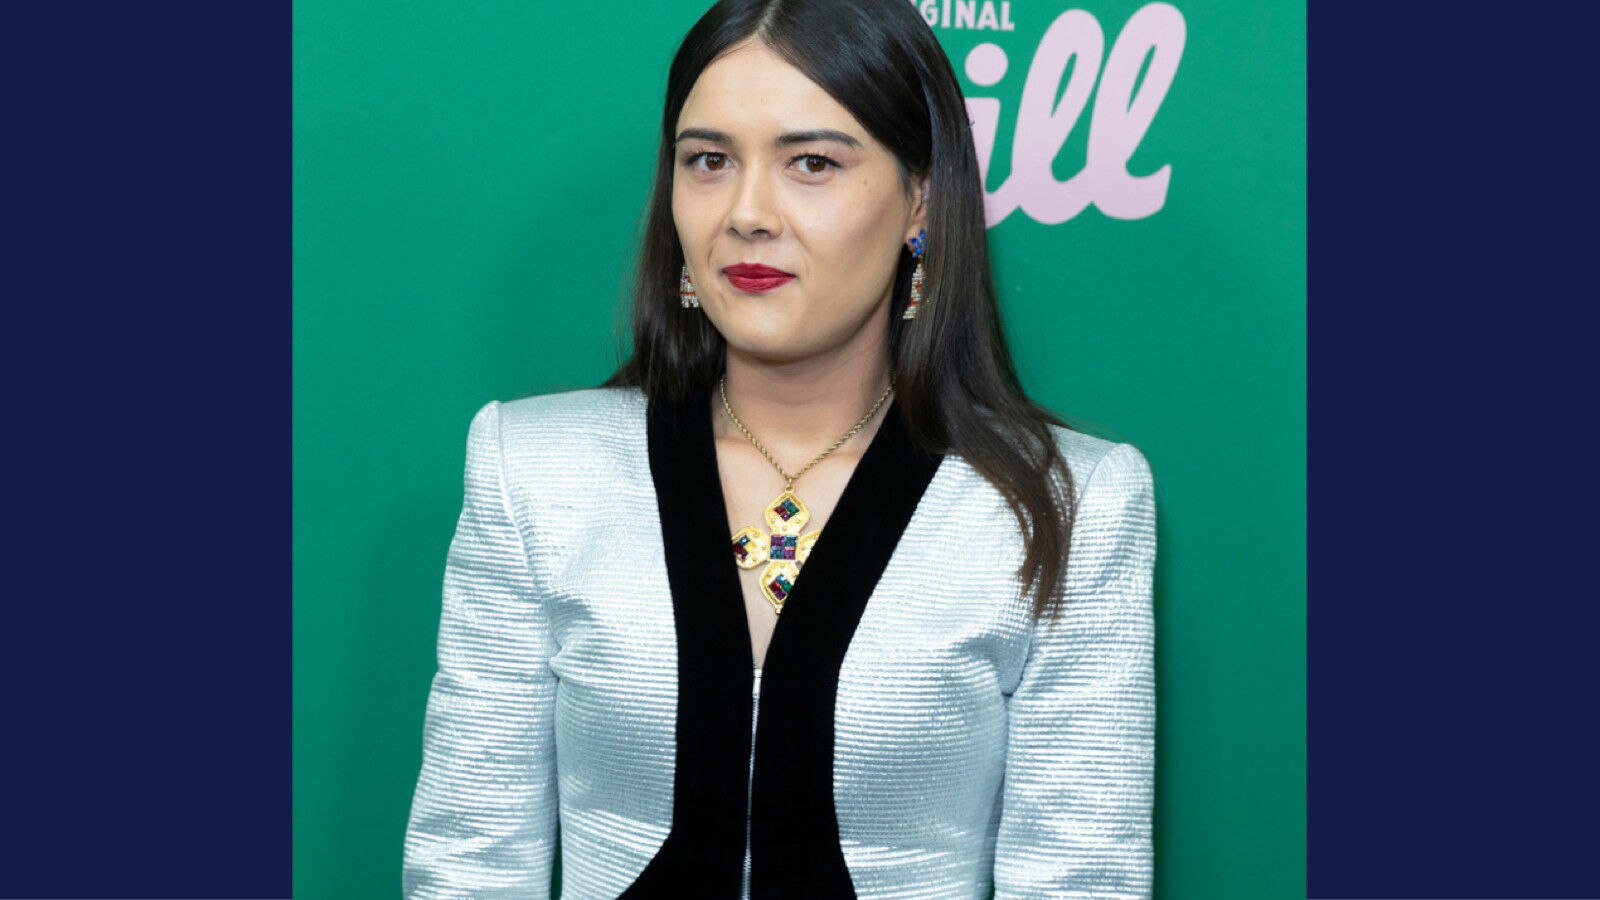 Patti Harrison attends New York Hulu Shrill premiere screening at Walter Reade Theater of Lincoln Center on March 13, 2019